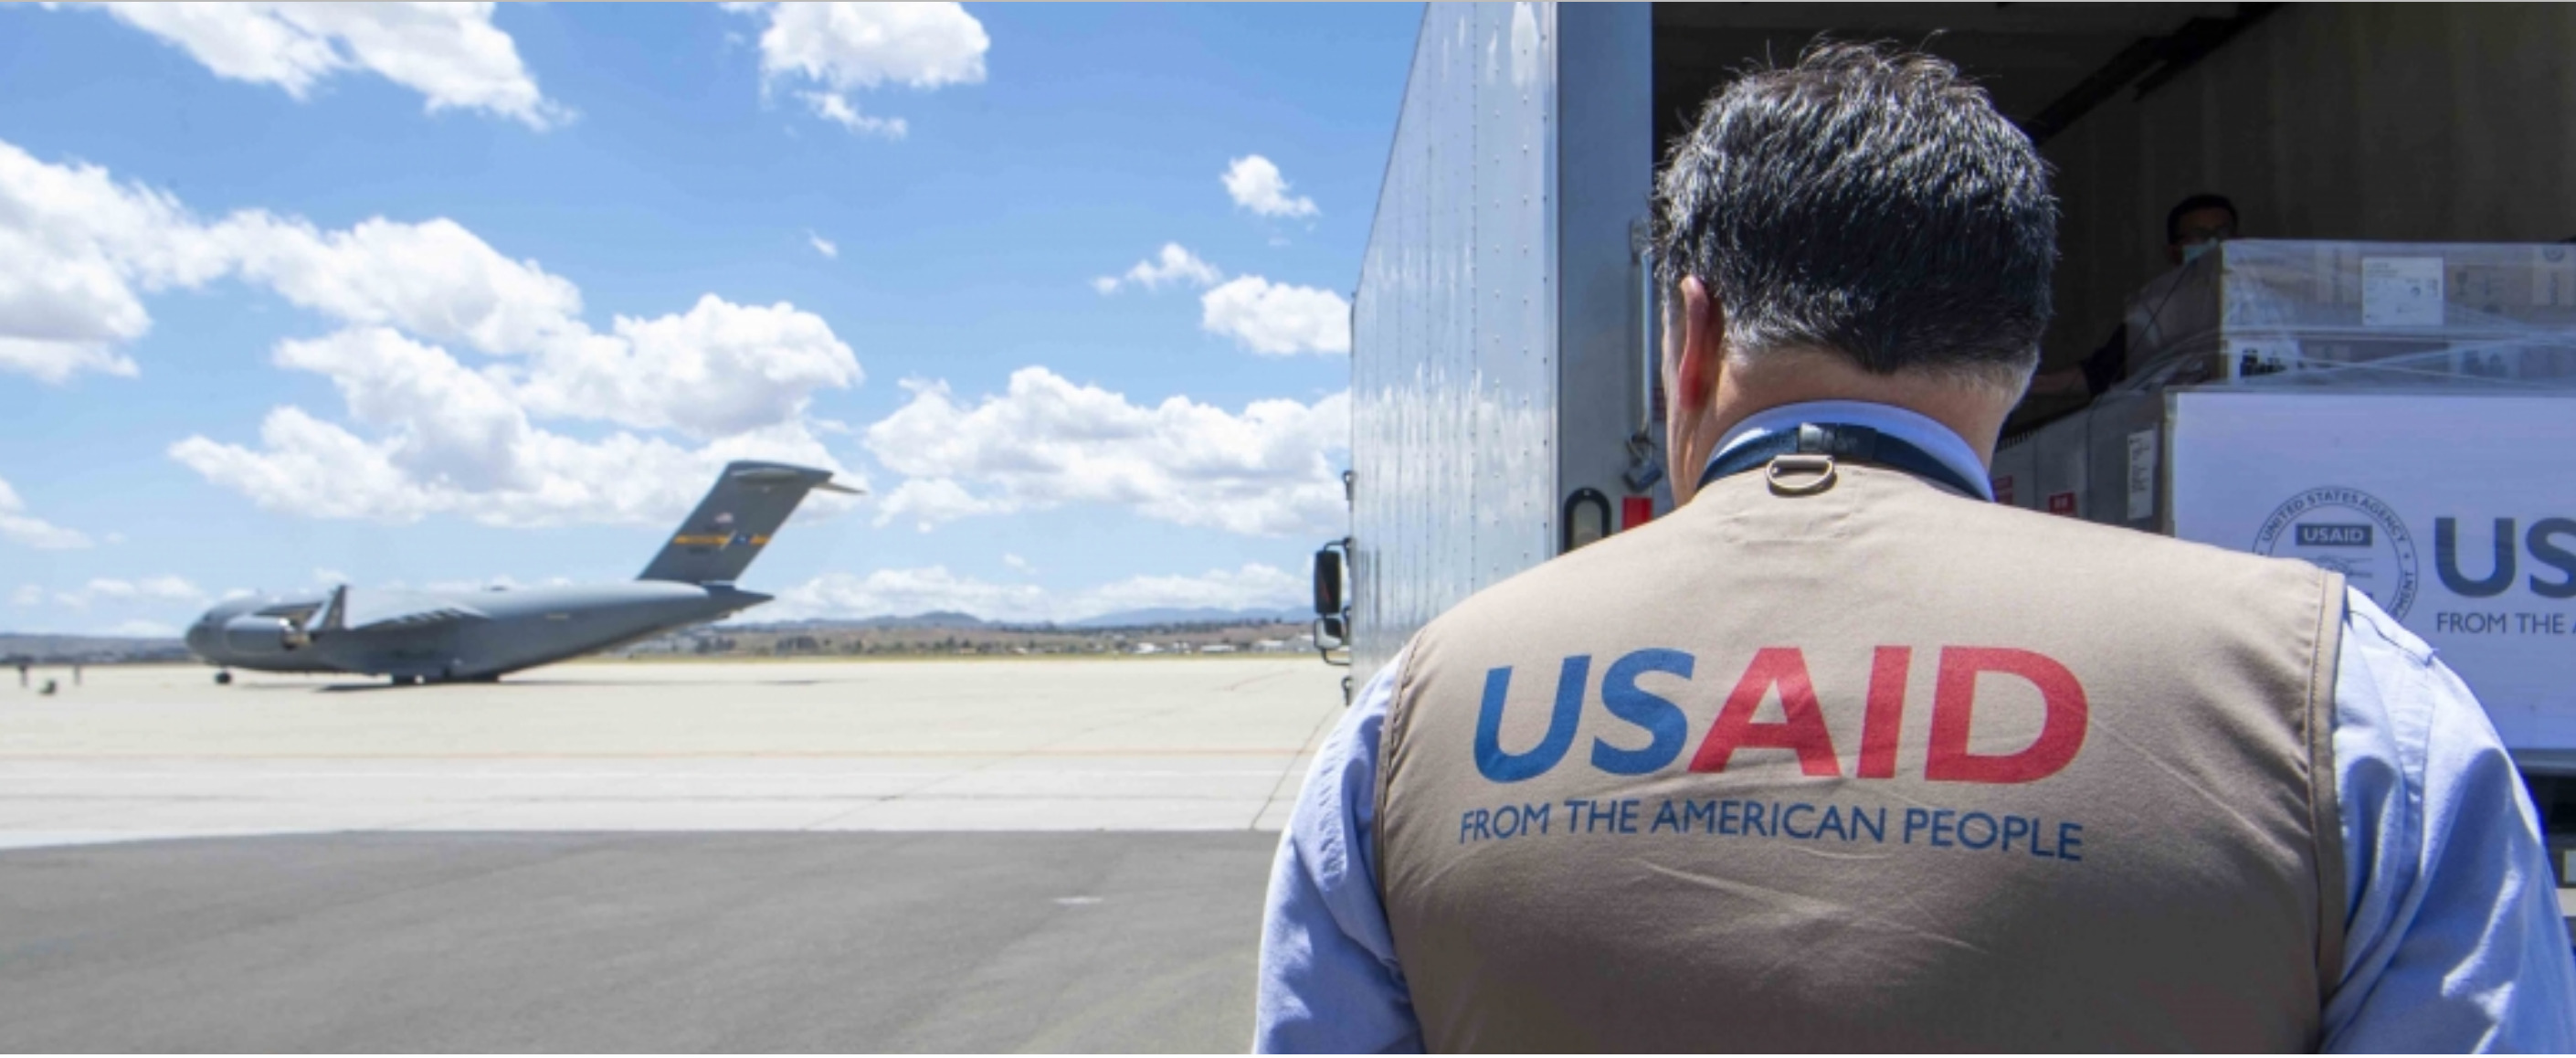 Worker wearing USAID vest, with plane in background